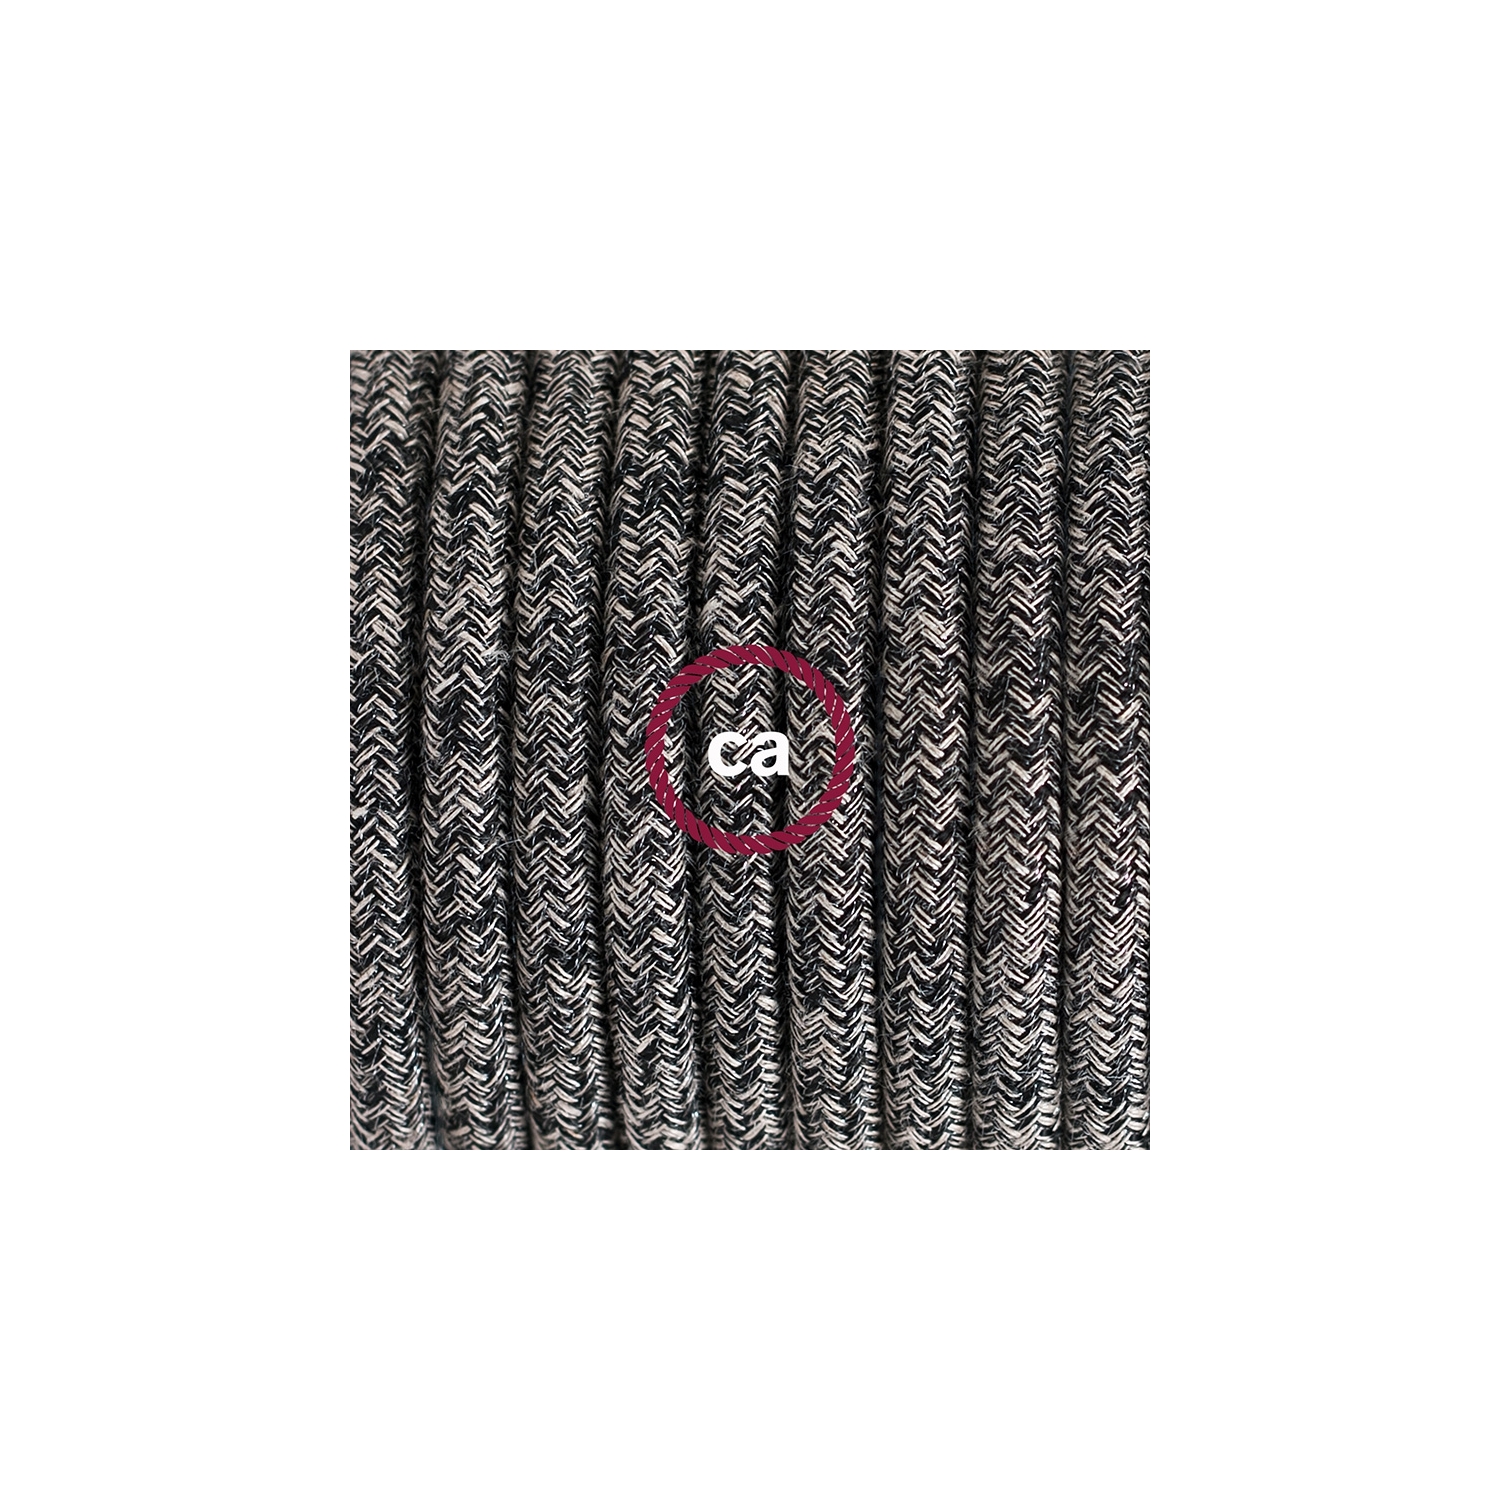 Plug-in Pendant for Lampshade with switch on socket | RS81 Black Glitter Cotton & Natural Linen Tweed